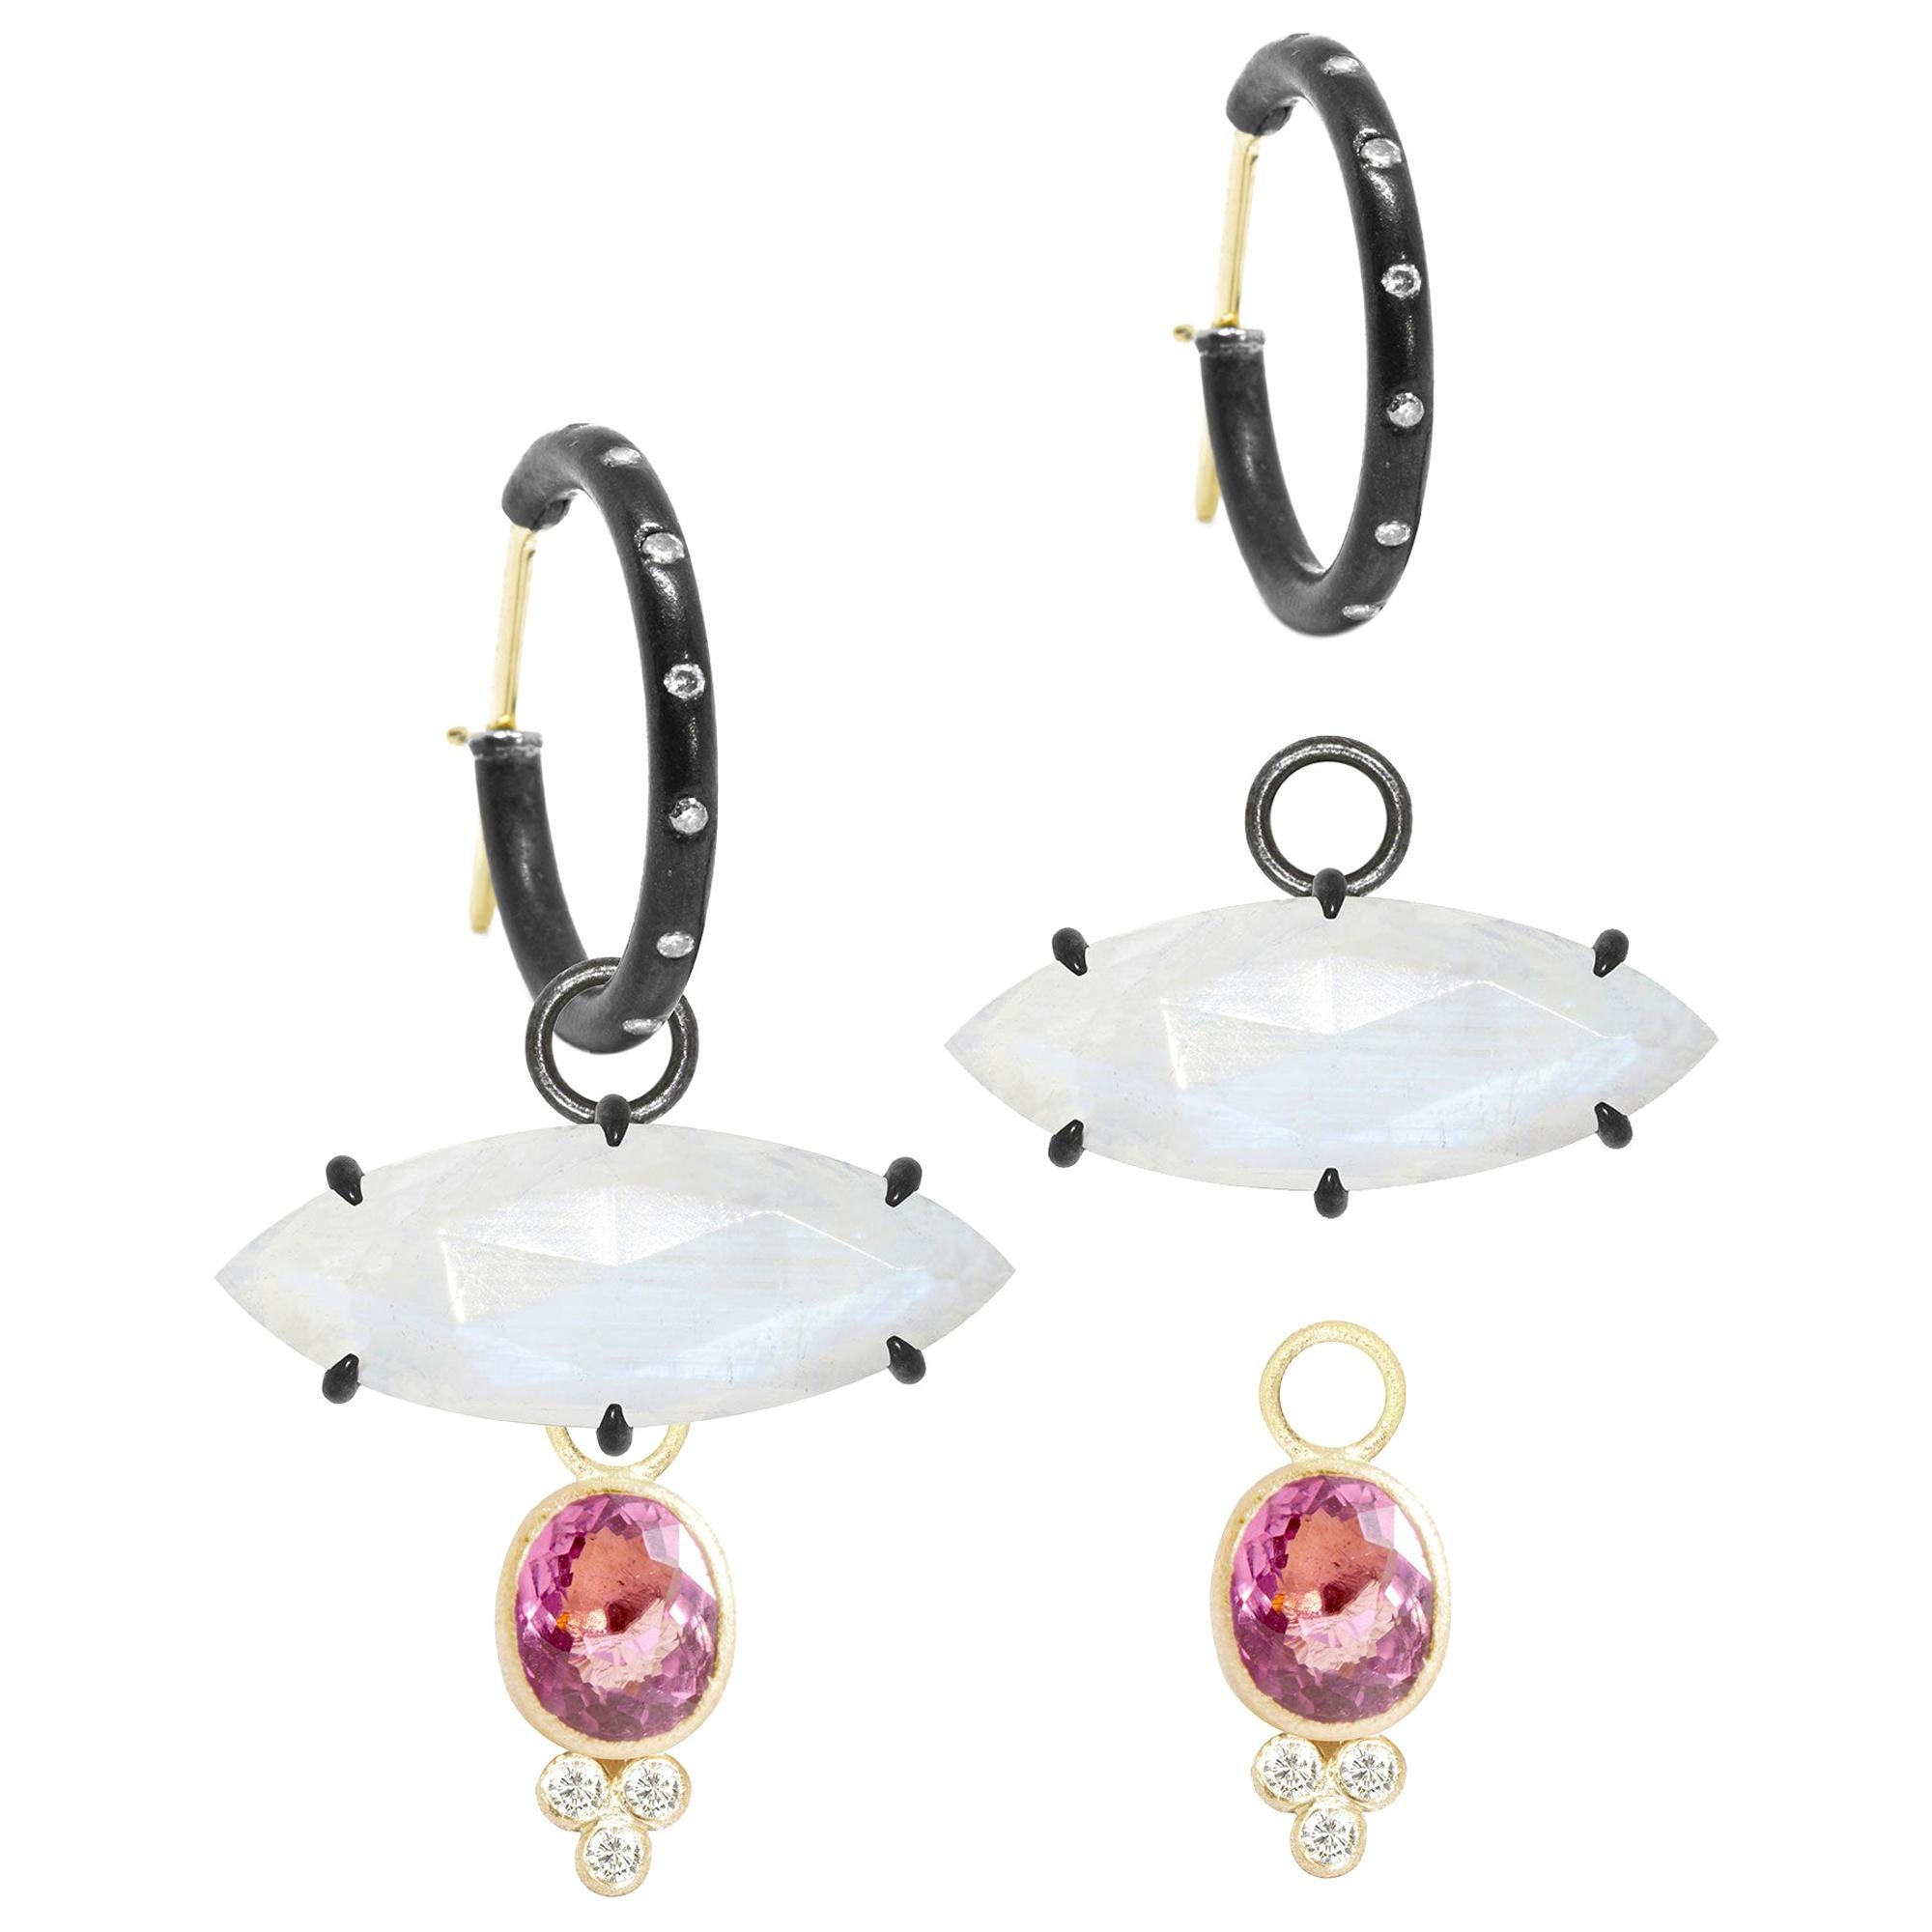 Mekong Med Moonstone Oxidized and Lilly Pink Tourmaline 18 Karat Gold Earrings